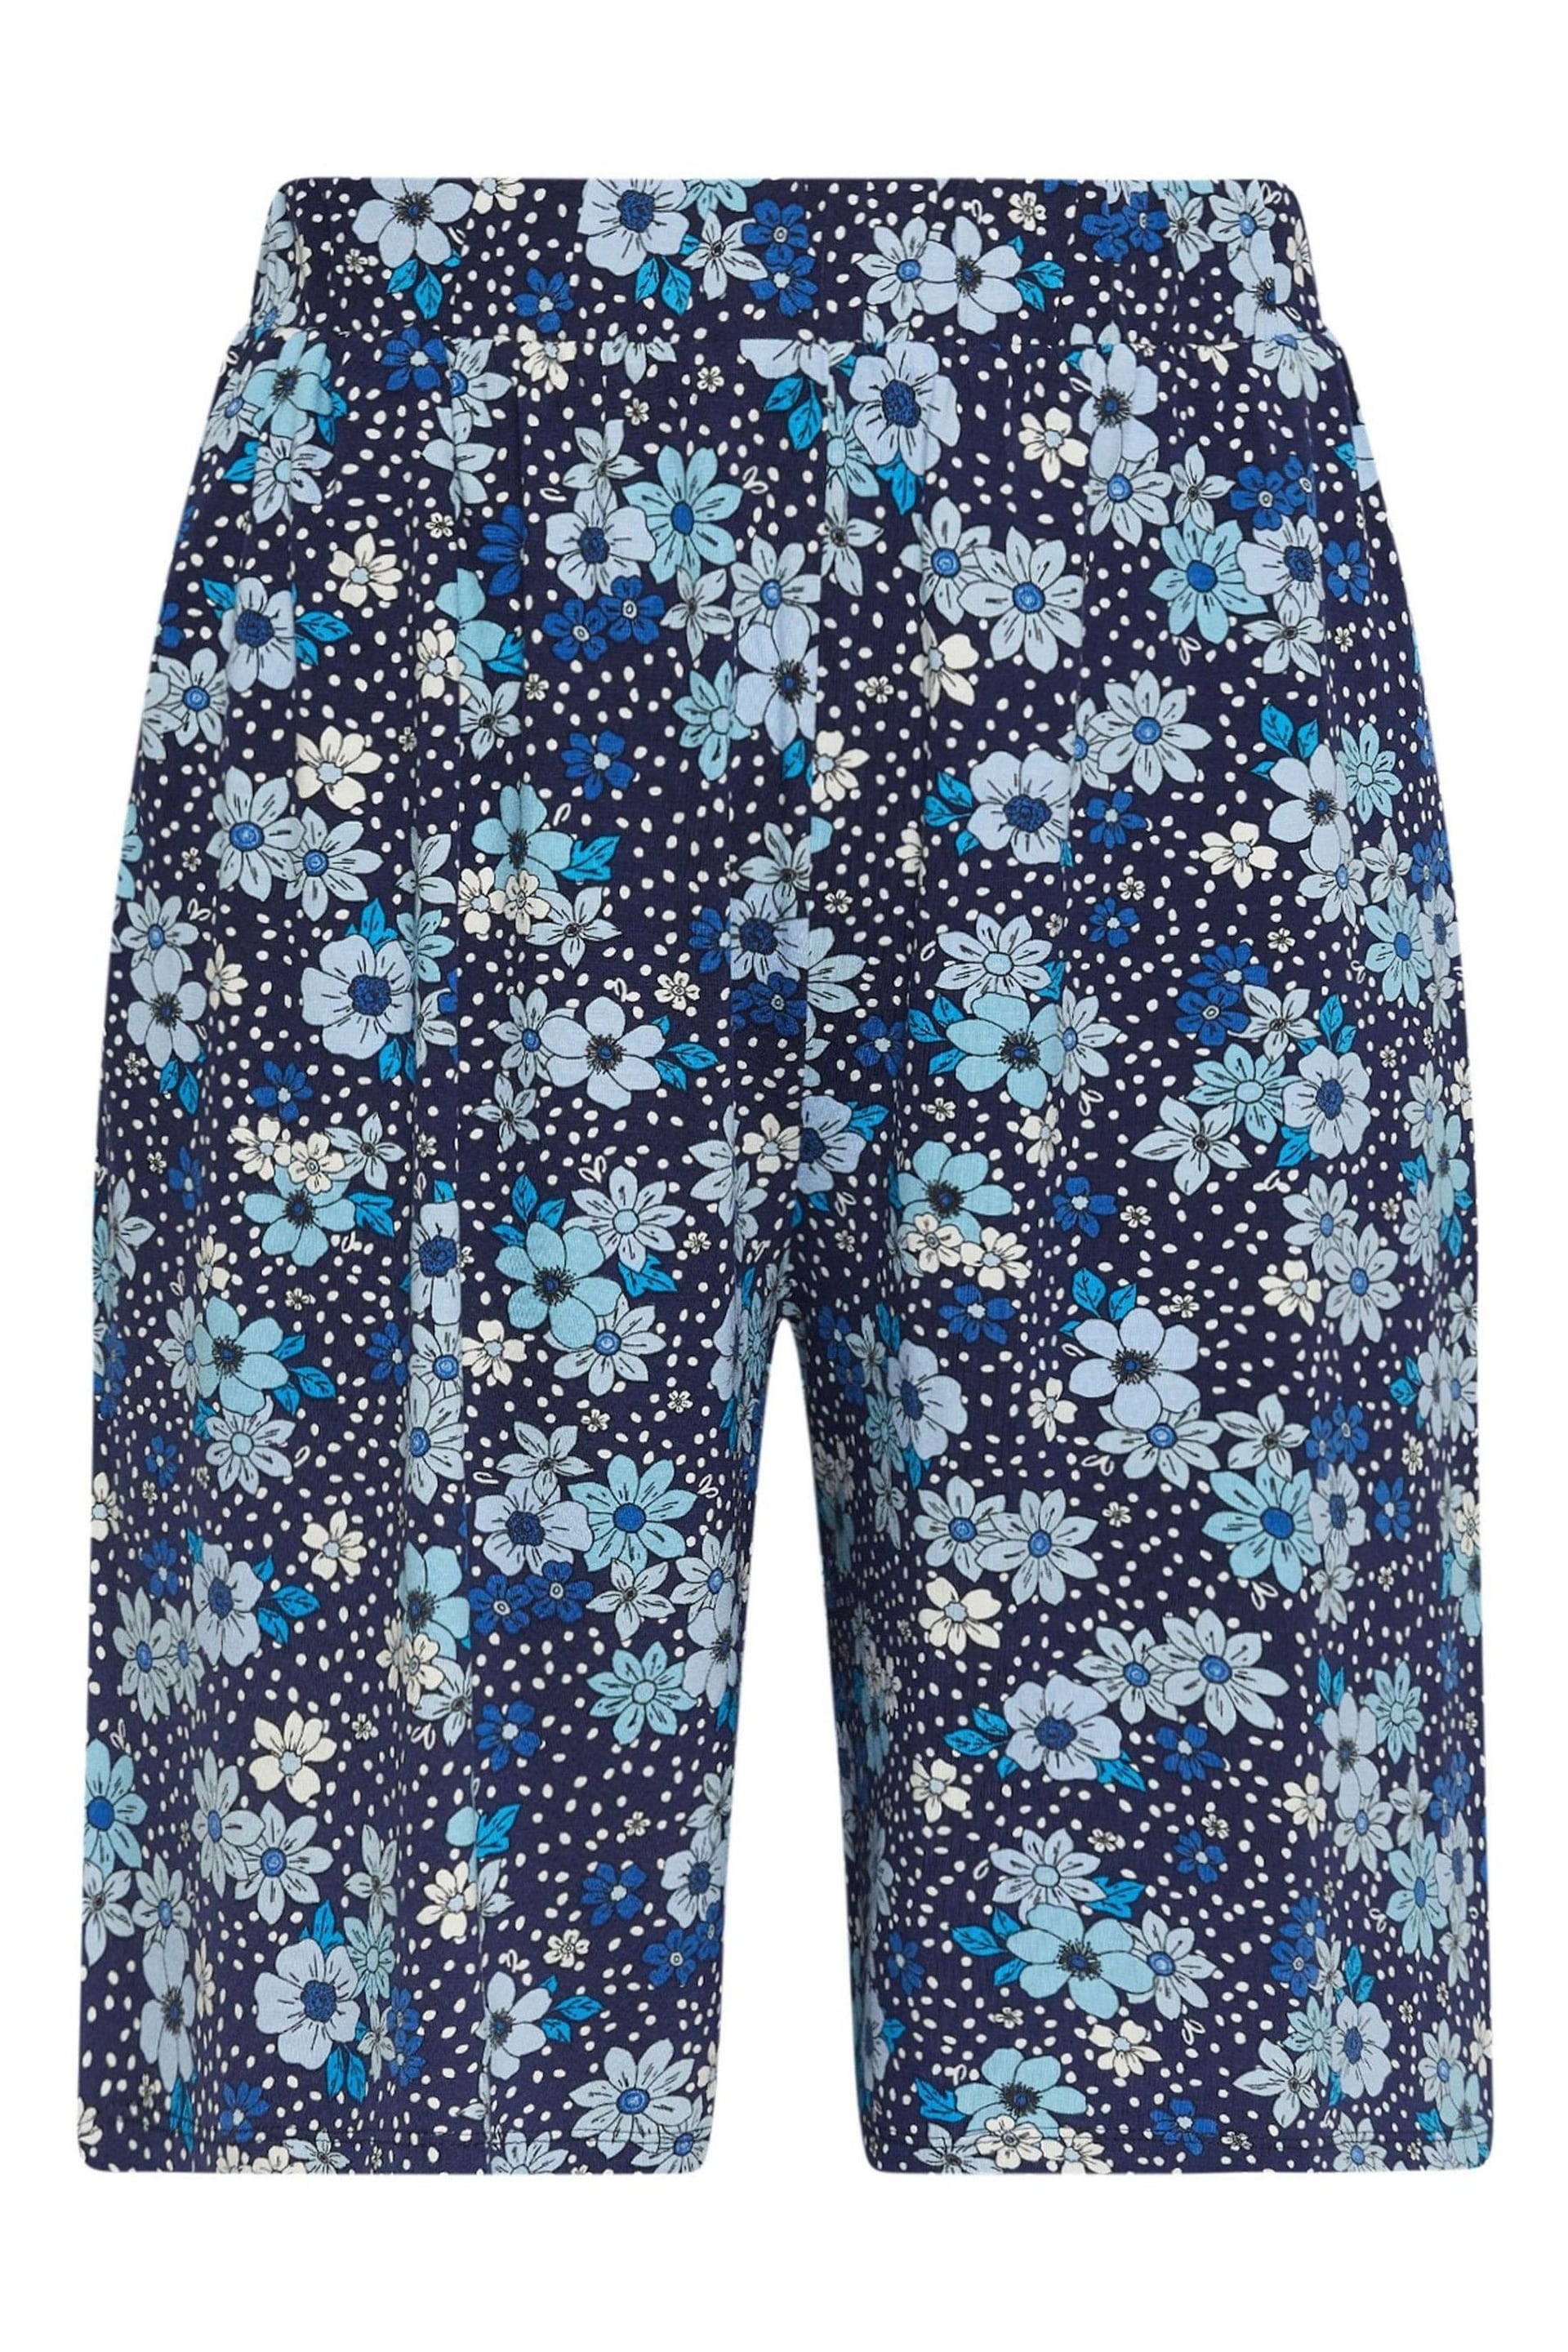 Yours Curve Blue Floral Print Shorts - Image 5 of 5